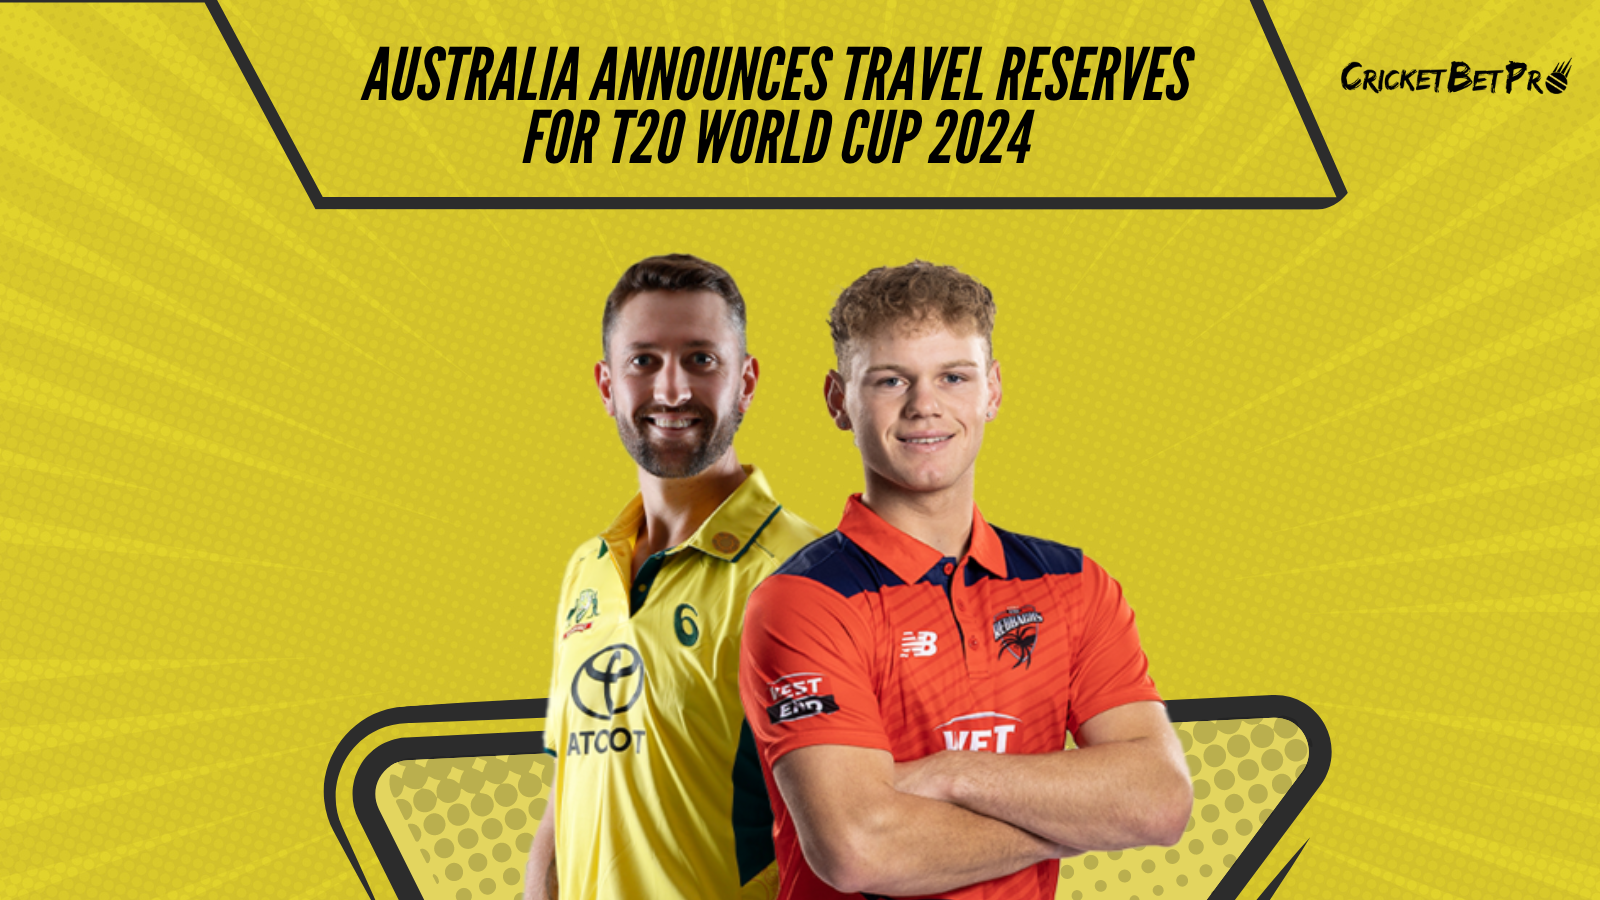 Australia Announces Travel Reserves for T20 World Cup 2024.png